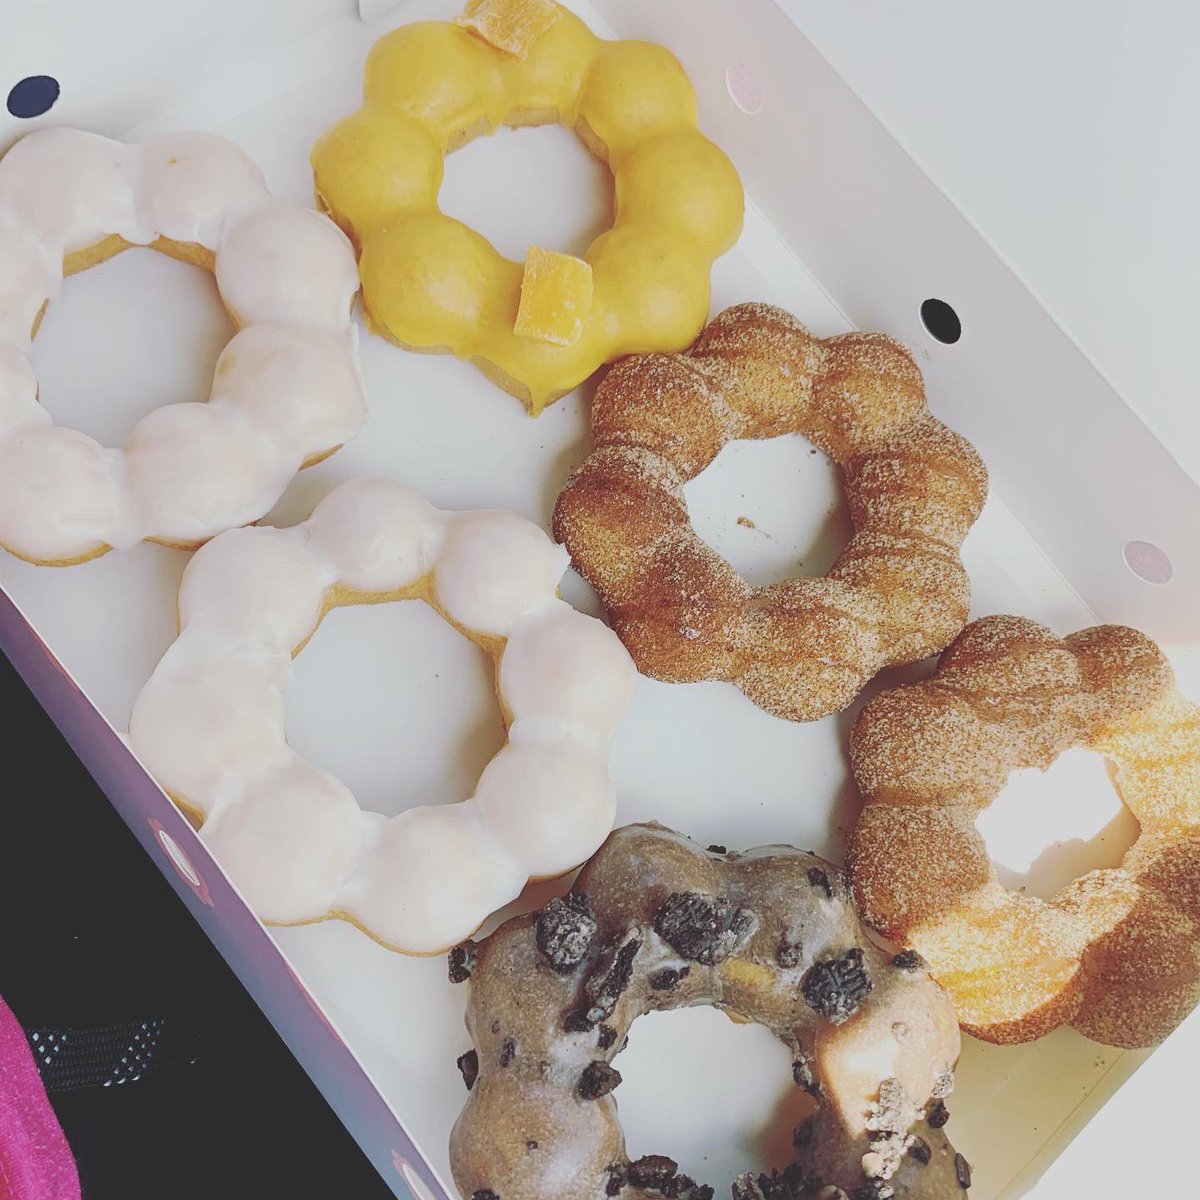 We had a sweet treat today! Mochinut moved into our area and opened last weekend! We were excited to try it and got our chance today. We give these tasty treats two thumbs up 👍🏼 👍🏼 #mochinut #mochinuts #donuts #sweettreats #newkidintown #trysomethingnew